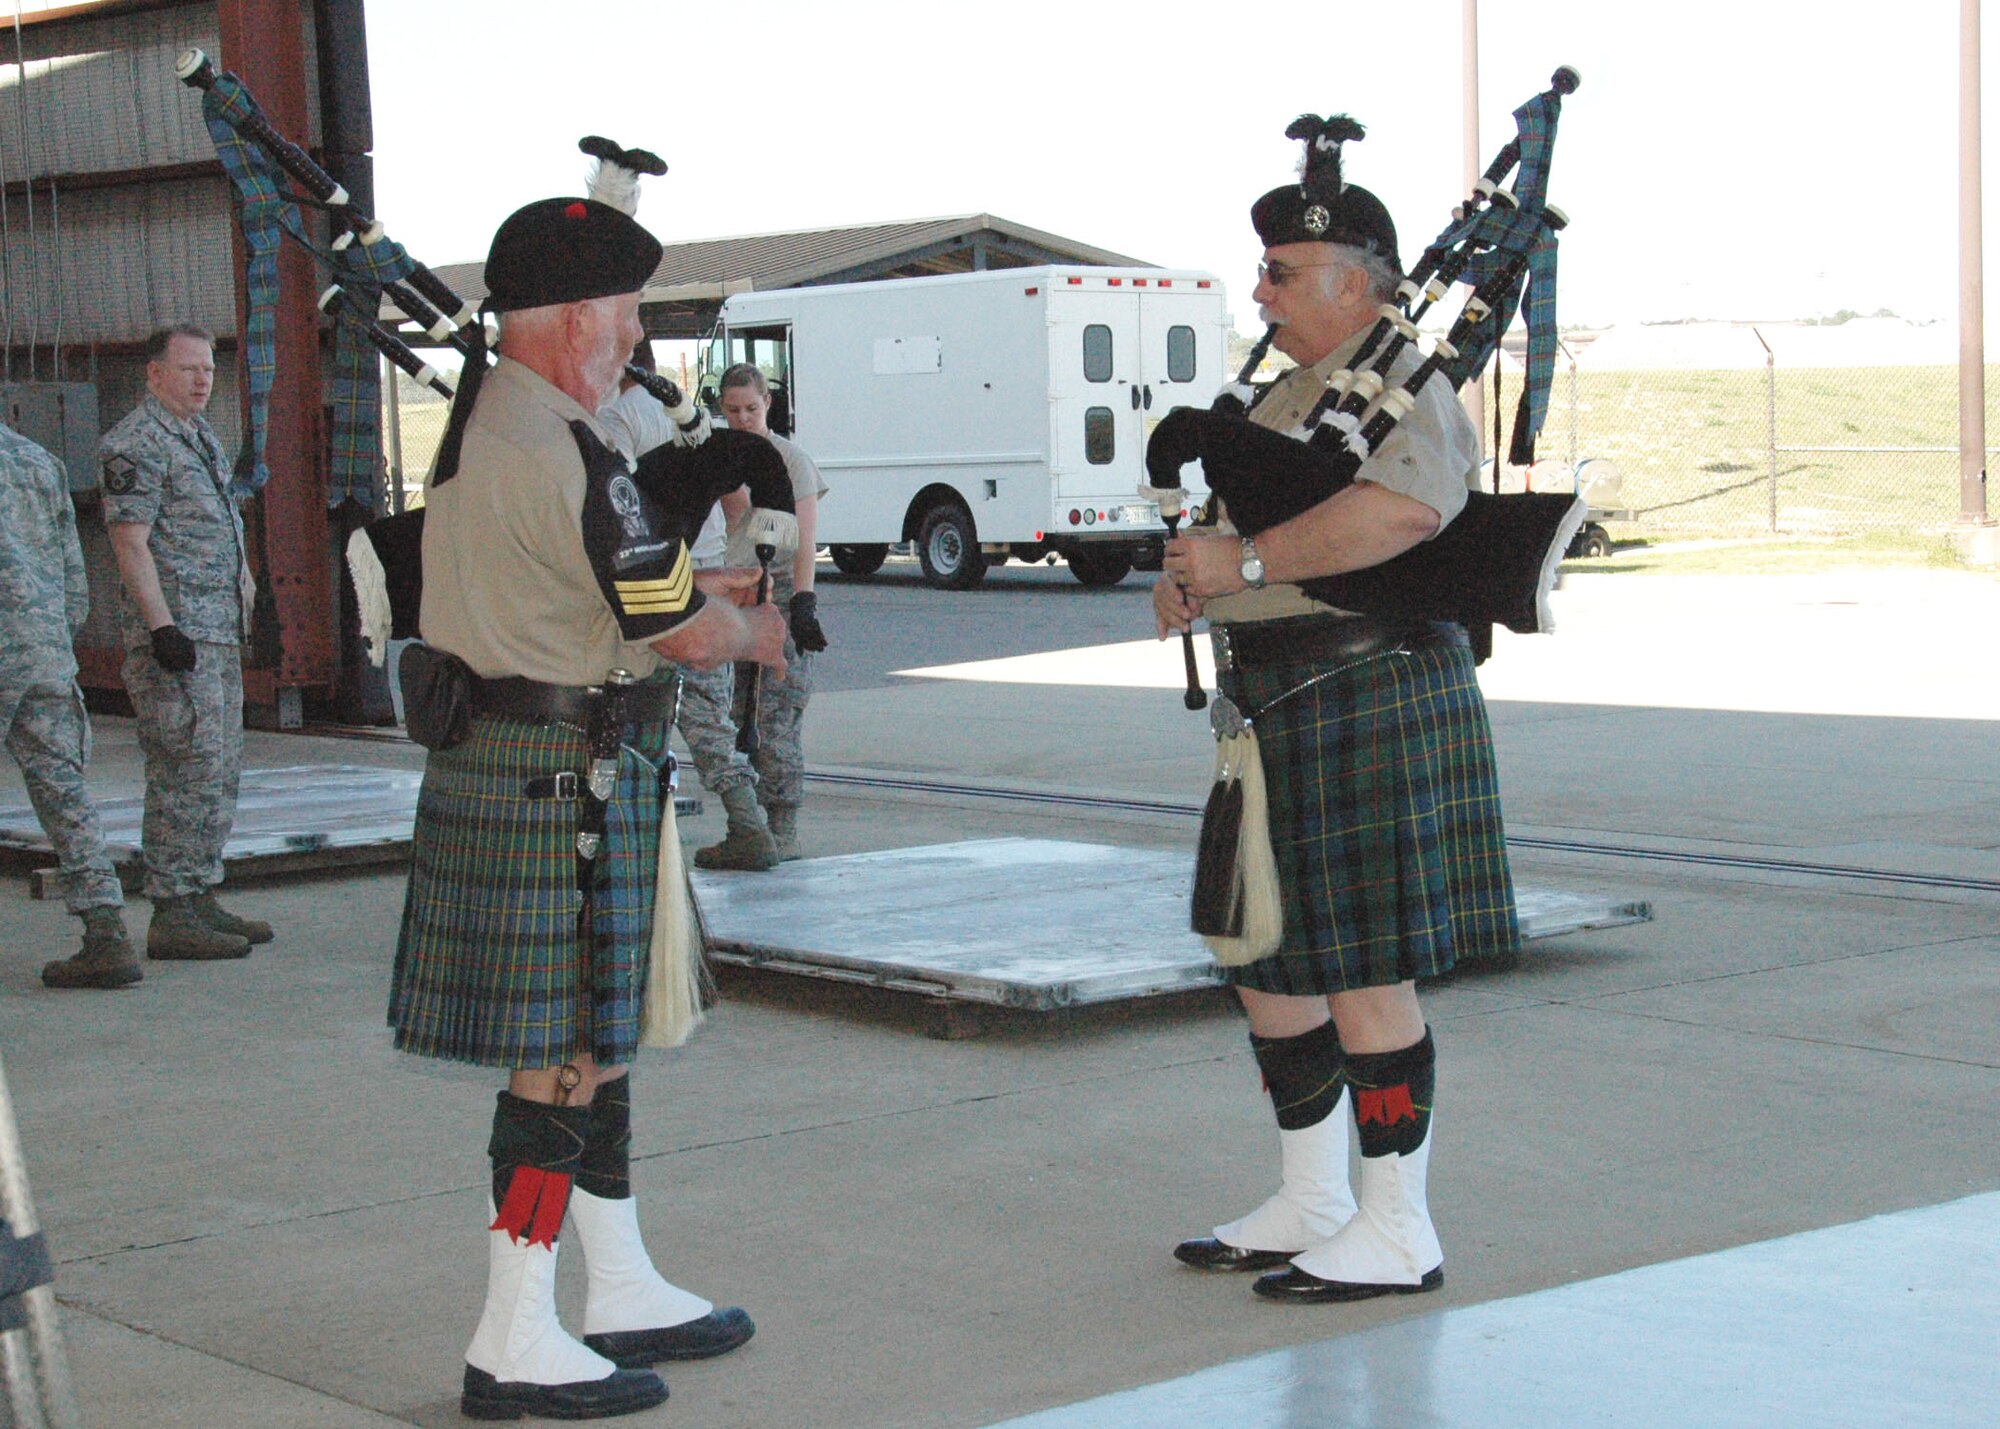 Pipe Sgt. Bob Andruss (left) and Pipe Maj. Bob Horner of the Destin-based 23rd Highlanders pipe and drum band play "Scotland the Brave" on the tarmac at Hurlburt Field April 6.  The musicians volunteered to perform during Operation Homecoming, an event that reunited returning Duke Field and Hurlburt warfighters with family, fellow Airmen and local civic leaders following lengthy deployments in support of operations in Southwest Asia. (U.S. Air Force photo/Dan Neely)